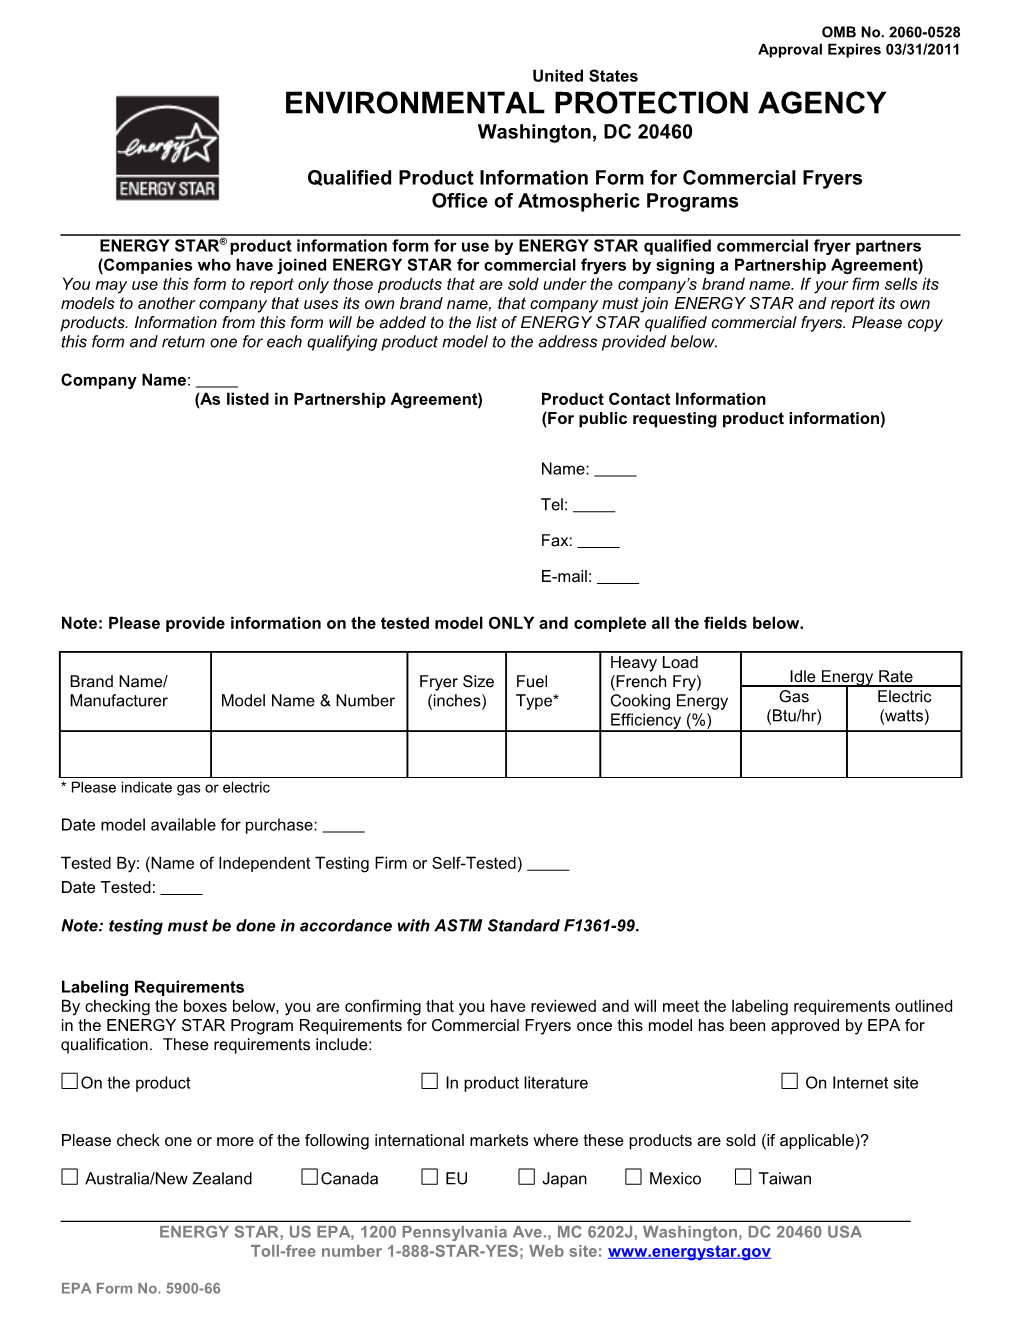 Qualified Product Information Form for Commercial Fryers